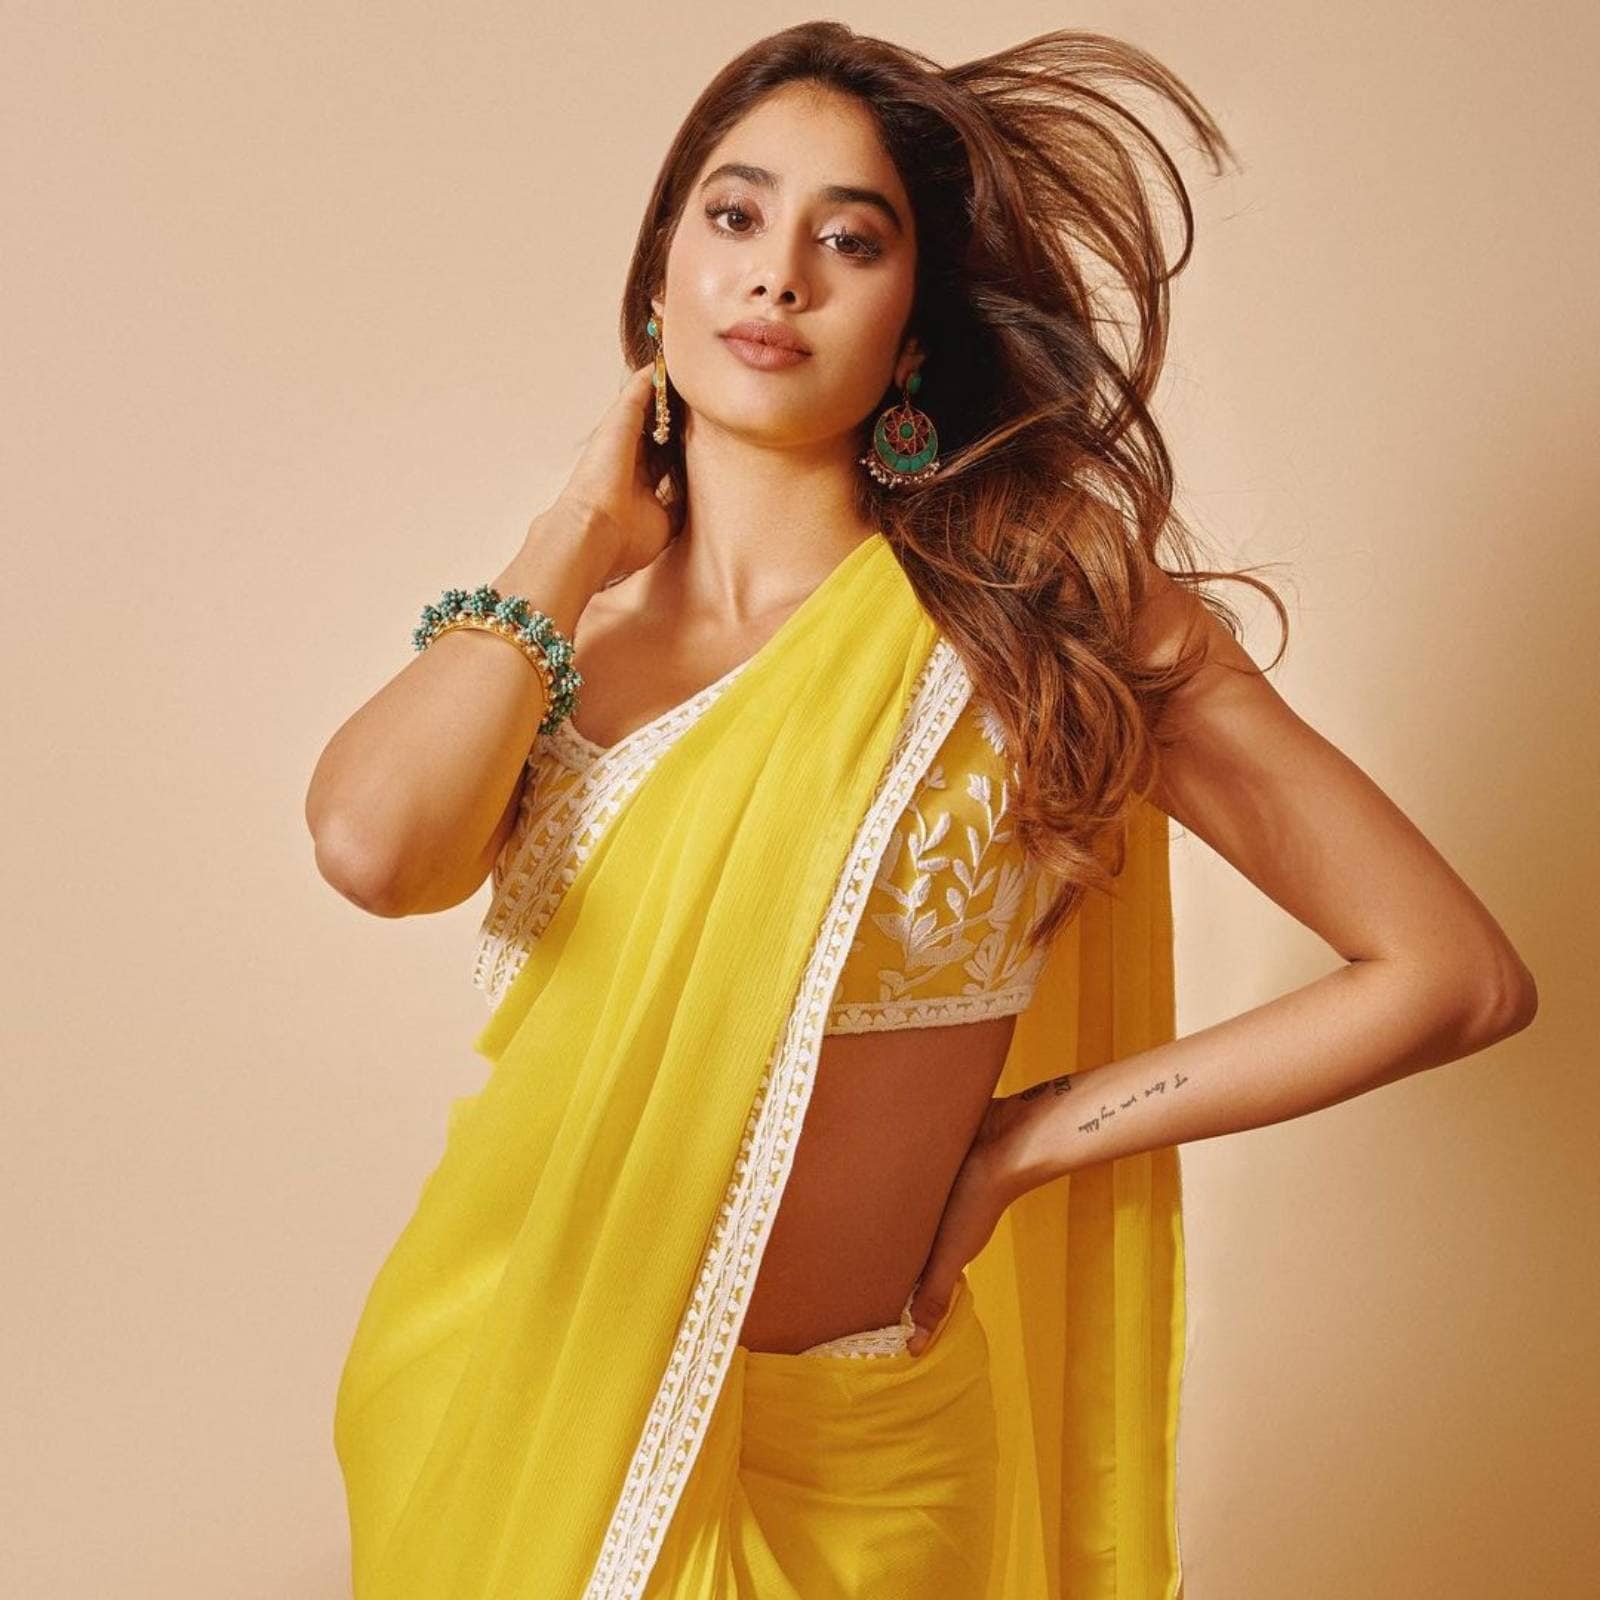 Highlight Your Curvaceous Body in a Saree With These Simple Tips